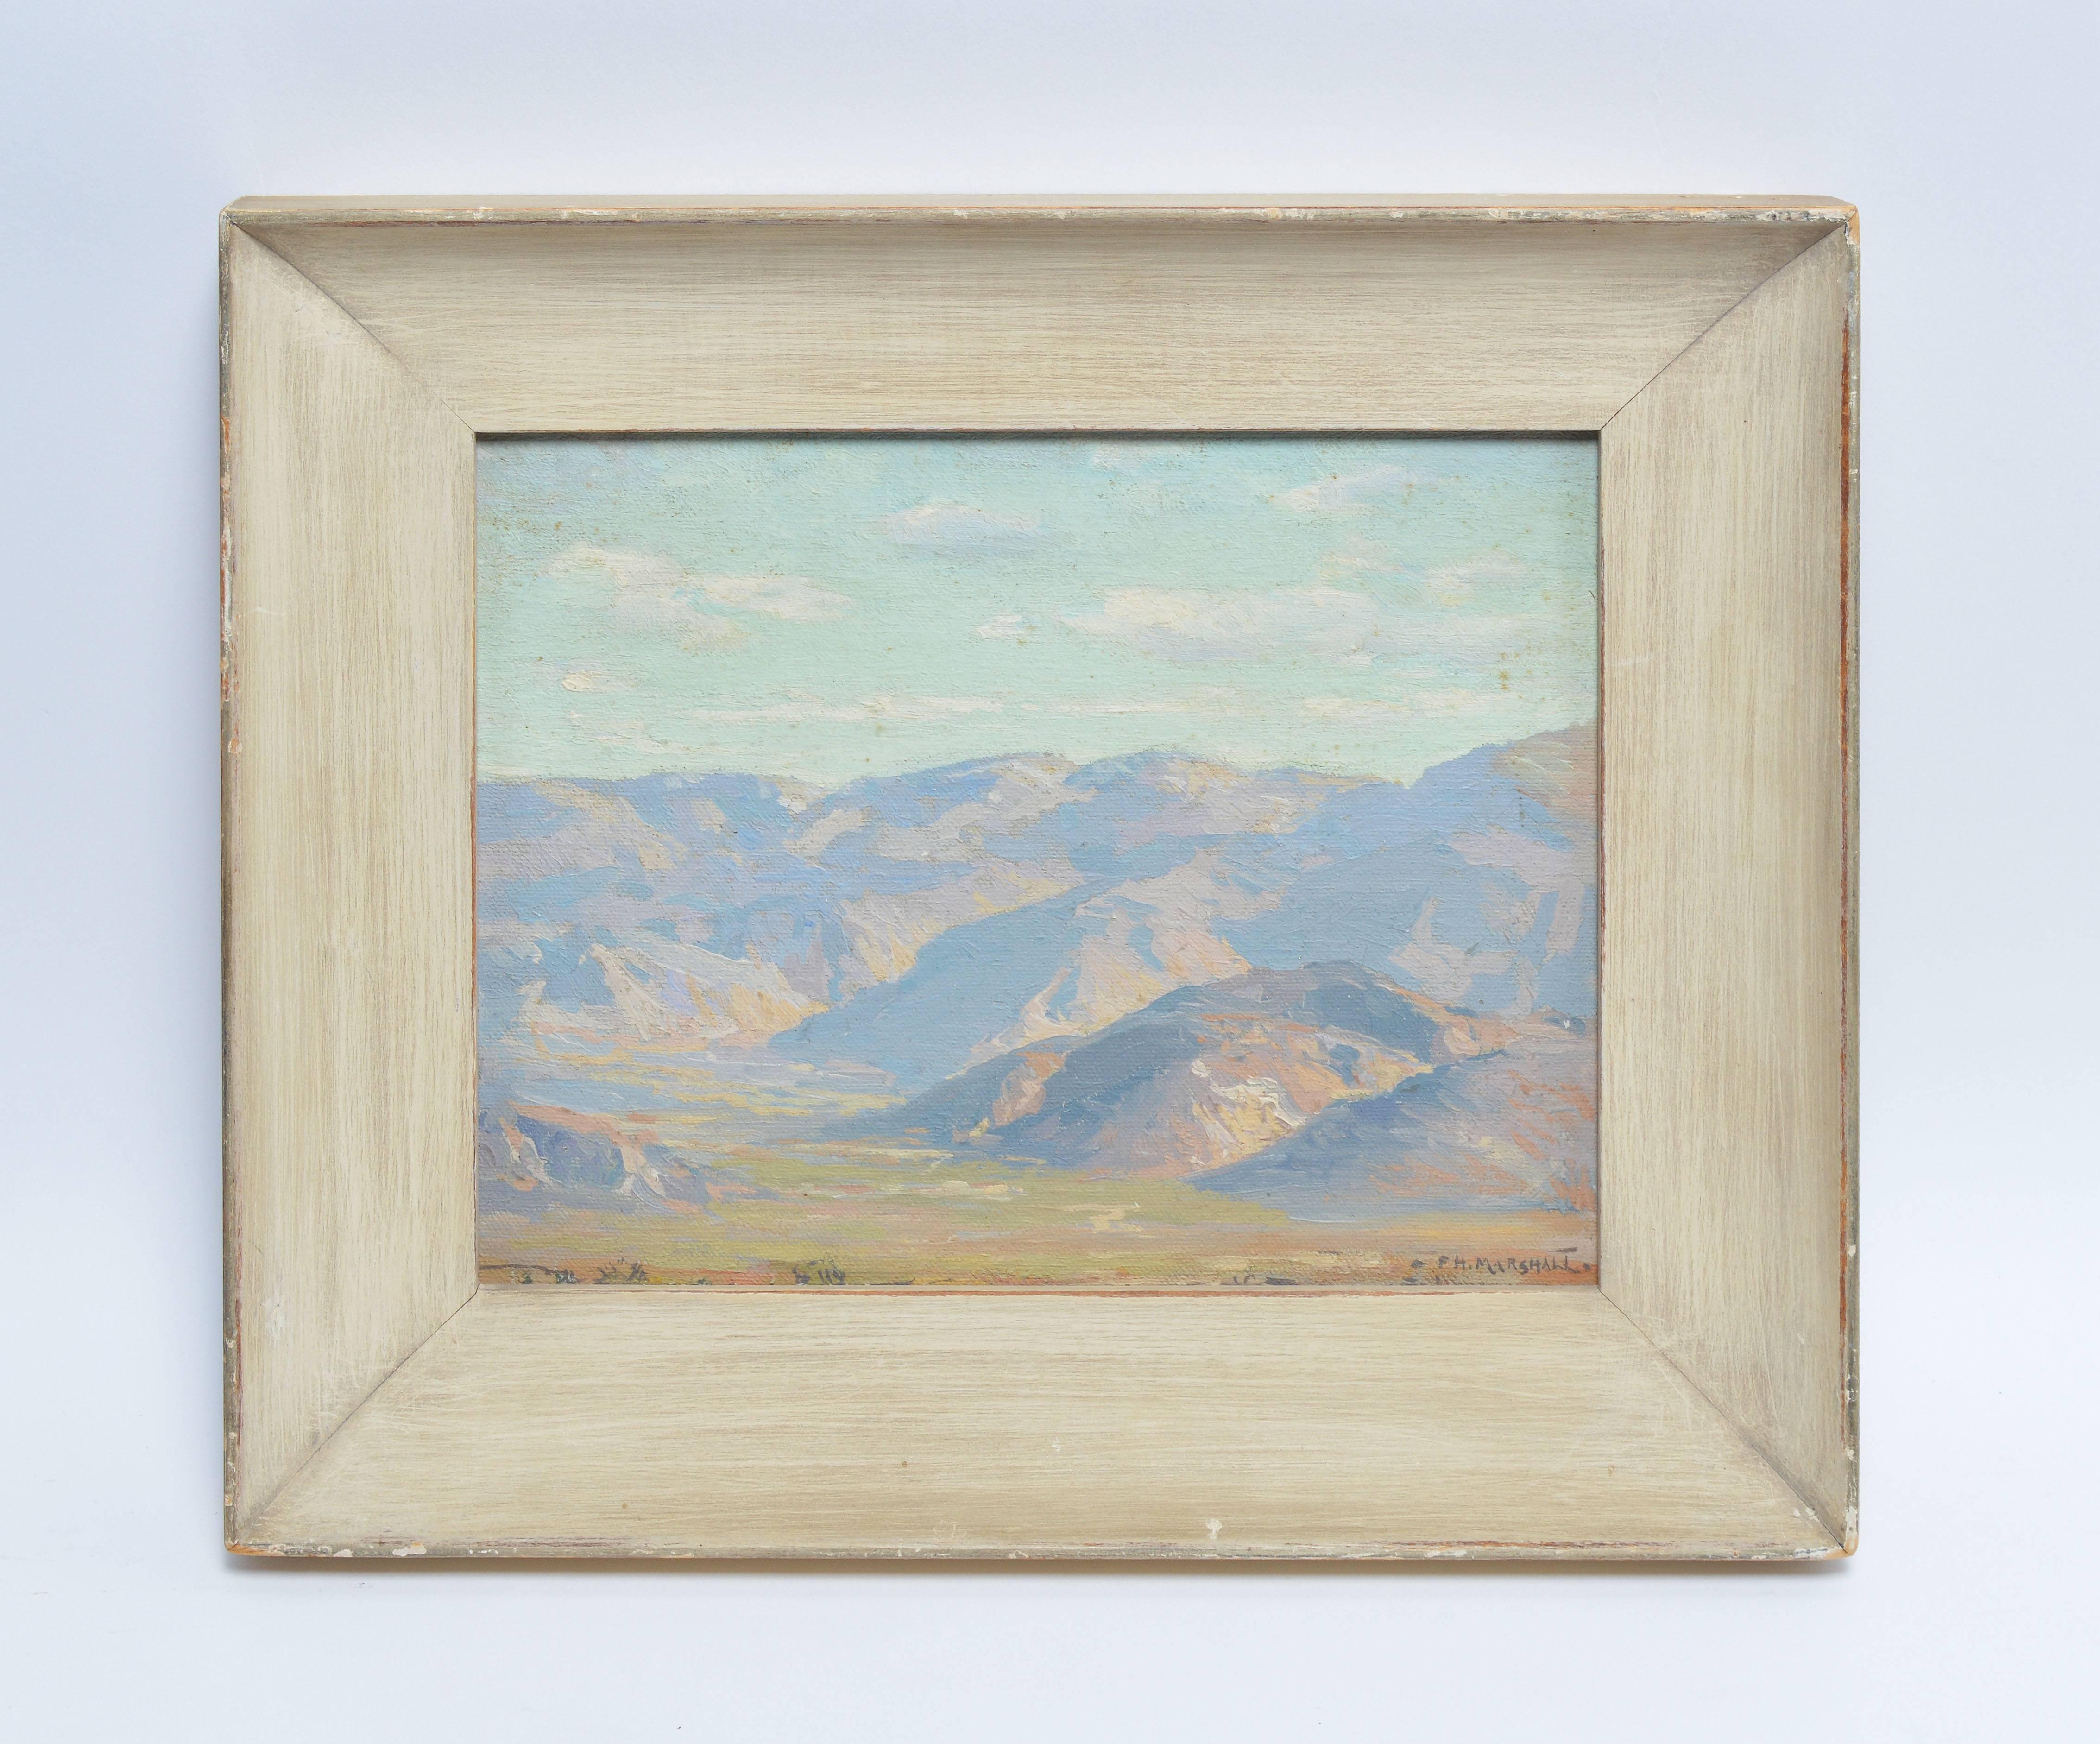 Banning Canyon, California, Plein Aire Impressionist Landscape by Frank Marshall - Painting by Frank Howard Marshall